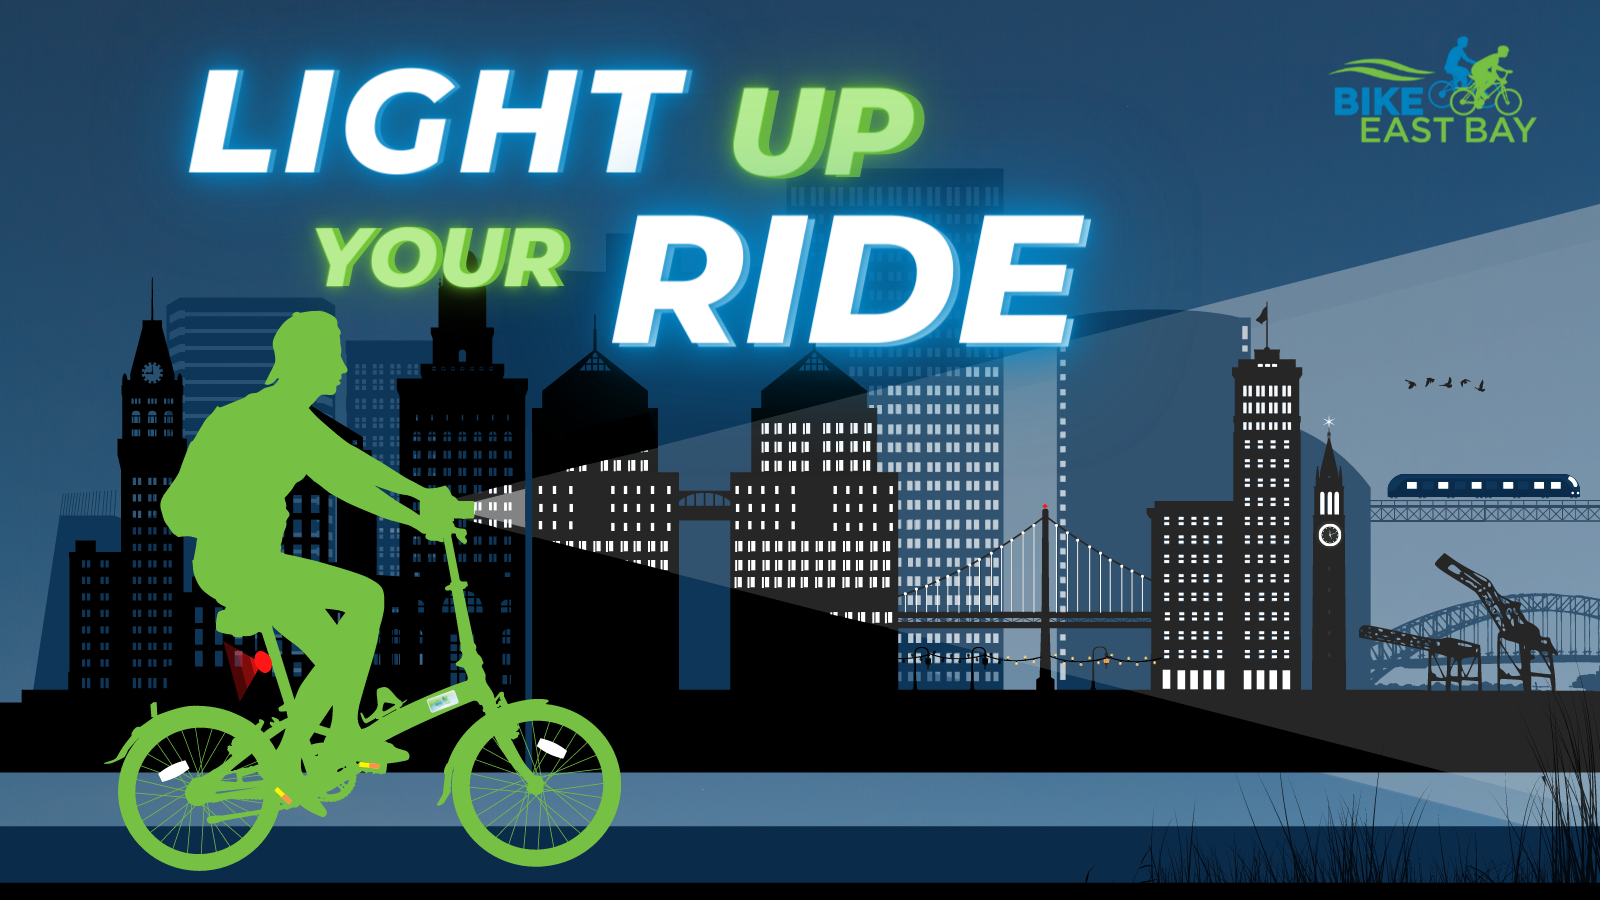 "Light up your ride" - Illustration of a bike rider silhouette against a city skyline at night - the bike headlight, rear light, and side reflectors shine in each direction